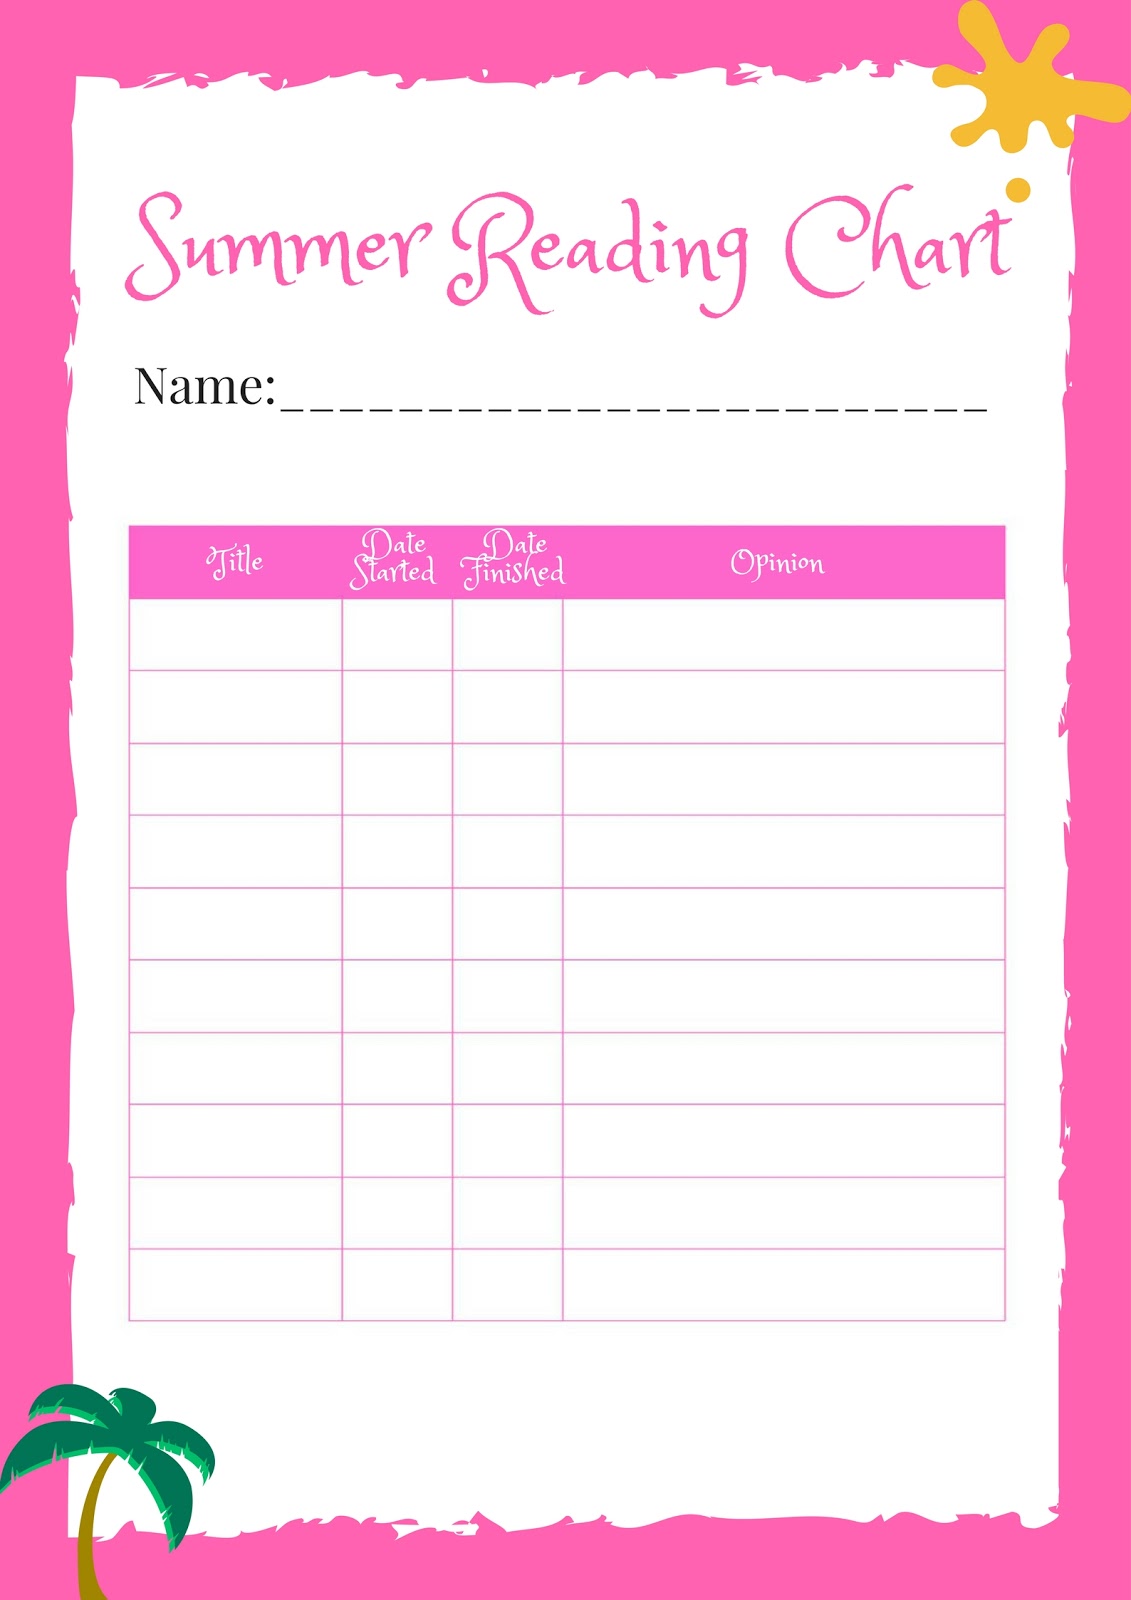 Summer Reading Charts for Kids free printable